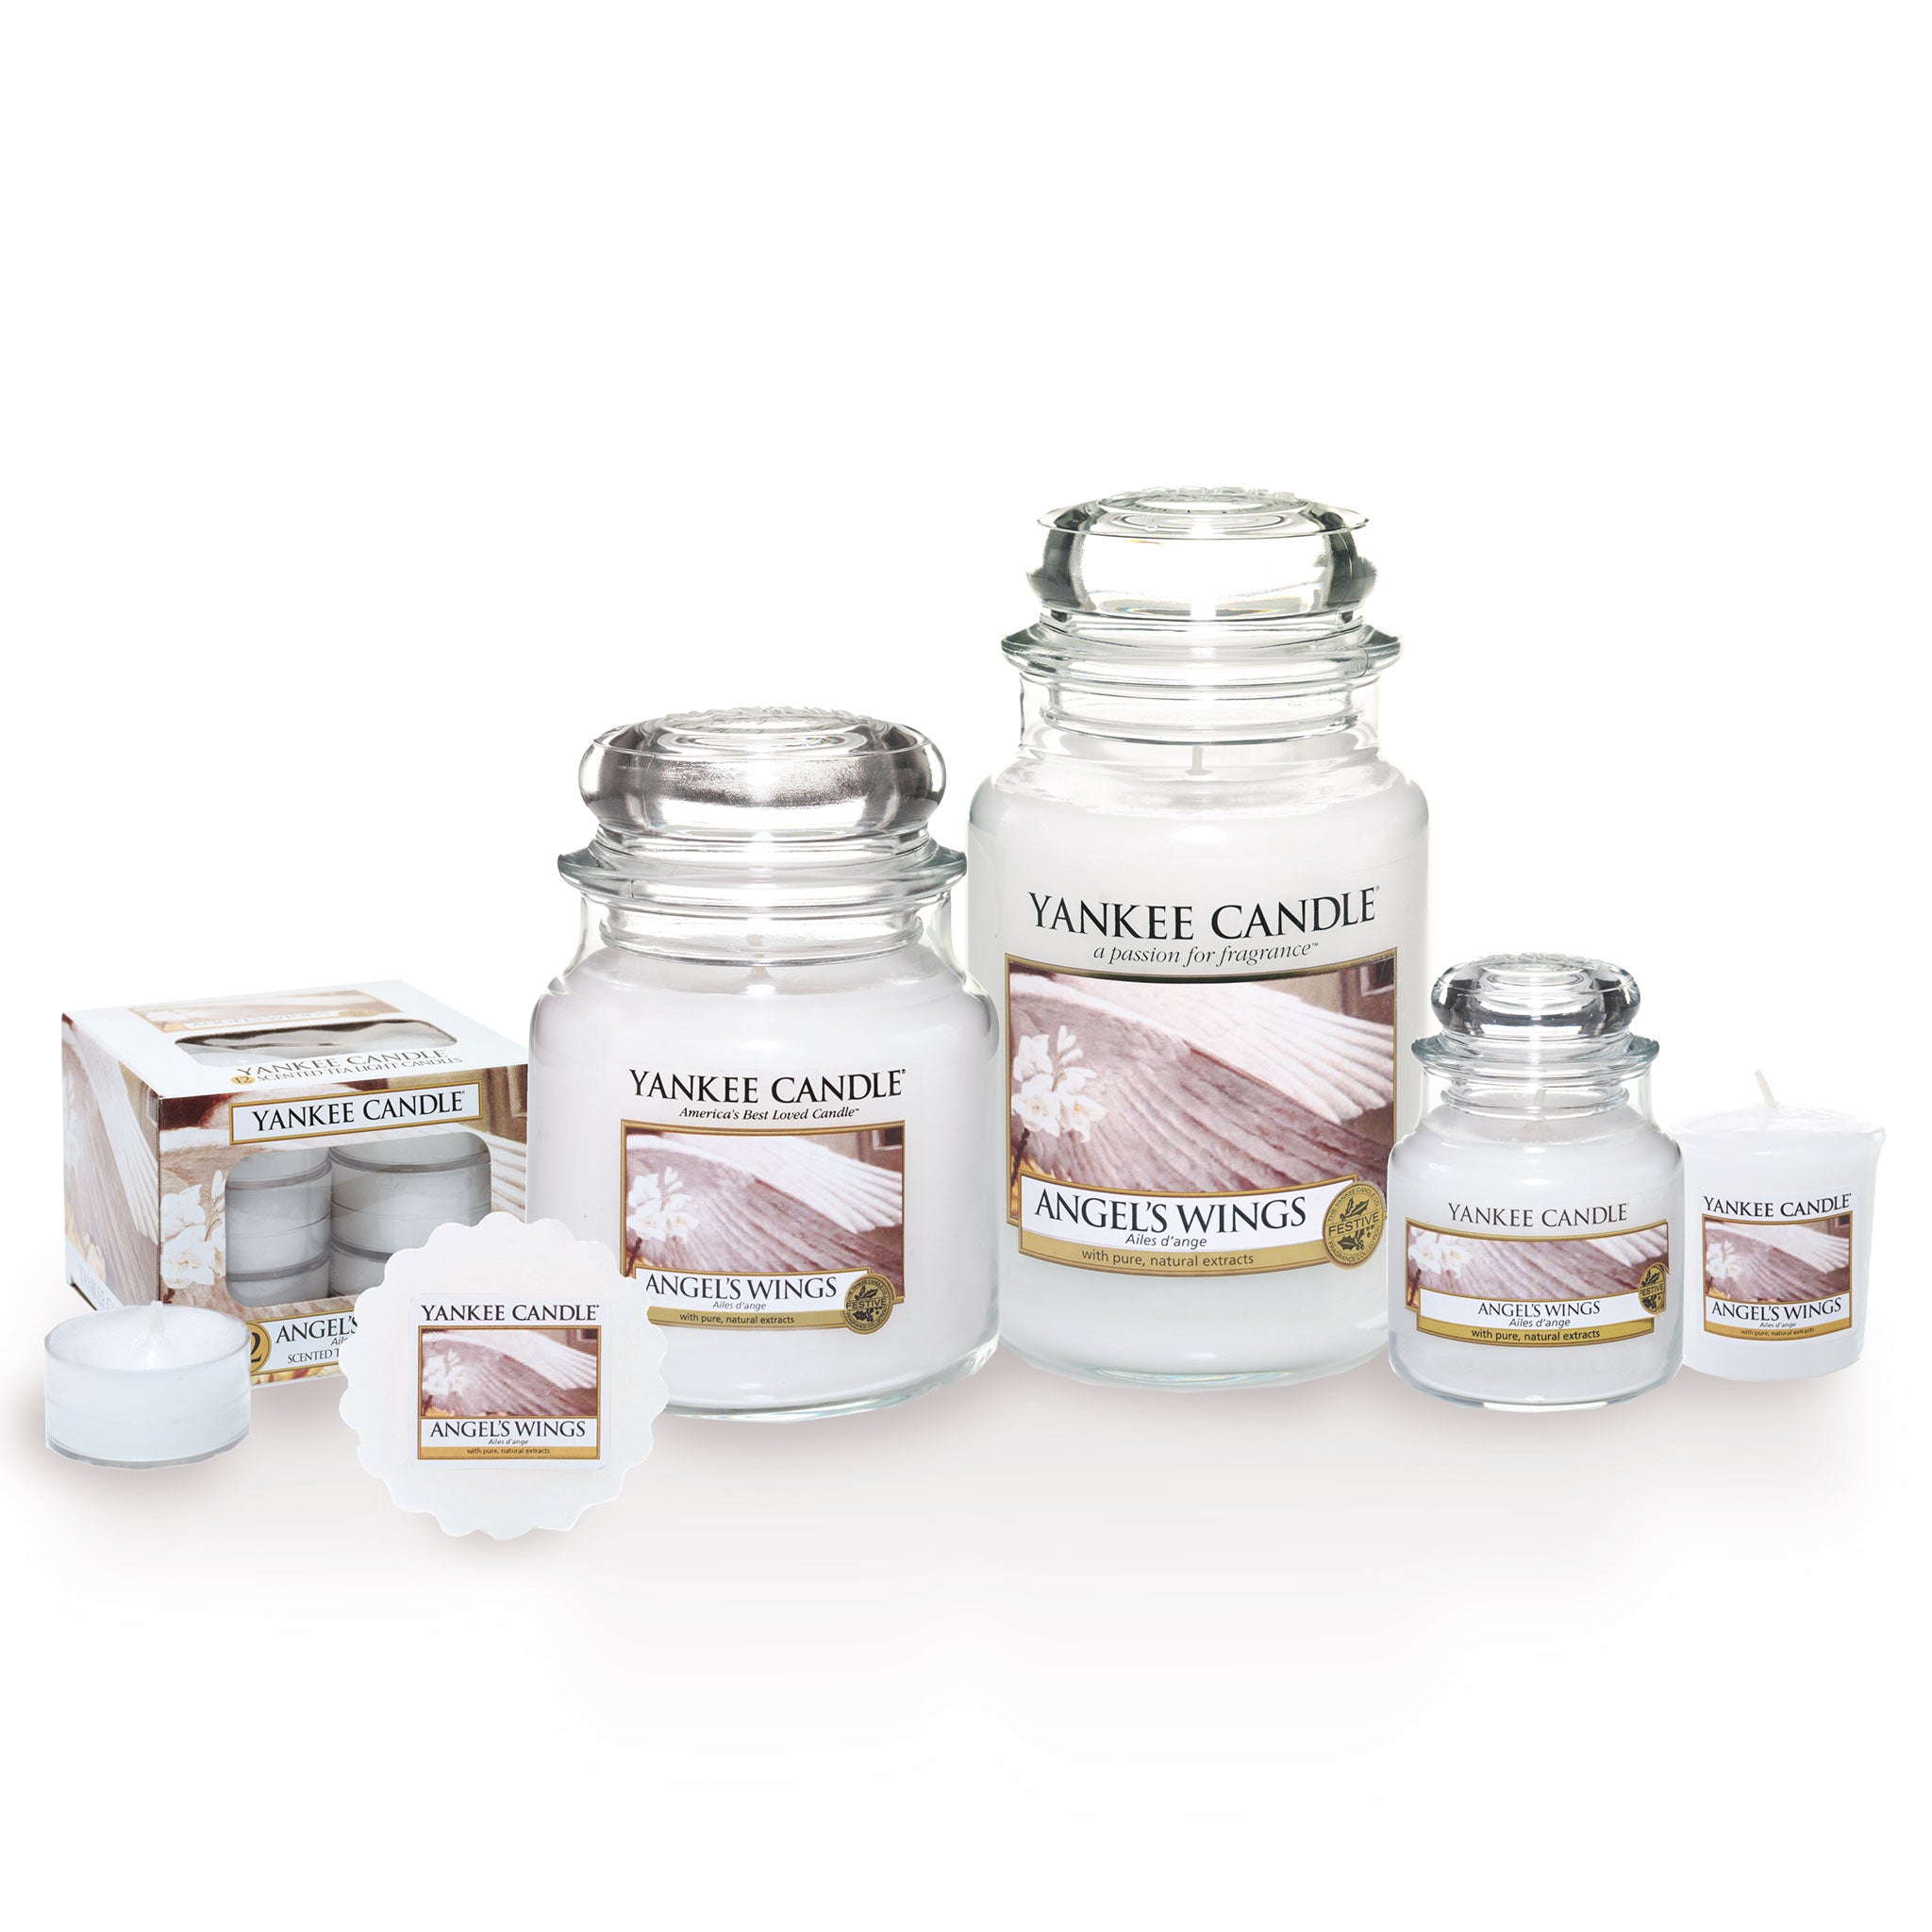 ANGEL'S WINGS -Yankee Candle- Giara Grande – Candle With Care